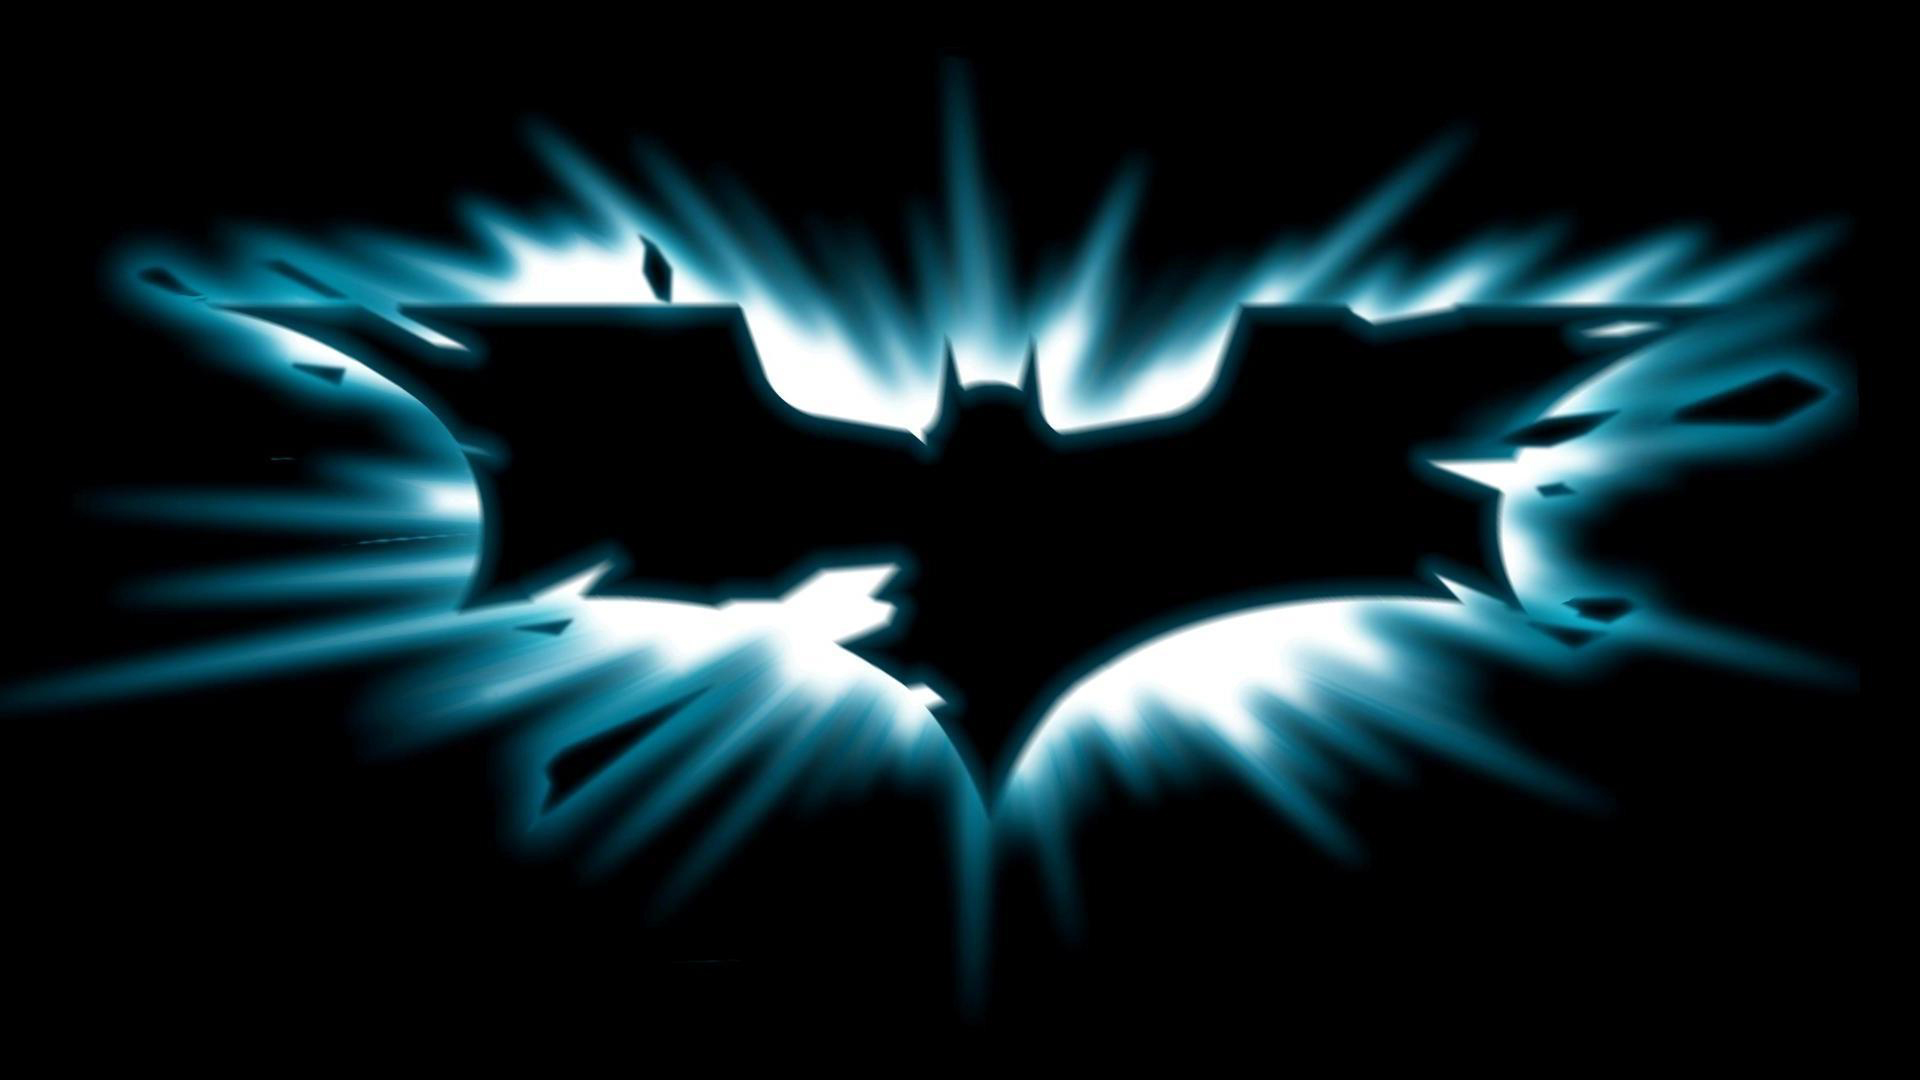 Batman Background Wallpaper Check This Out Our New